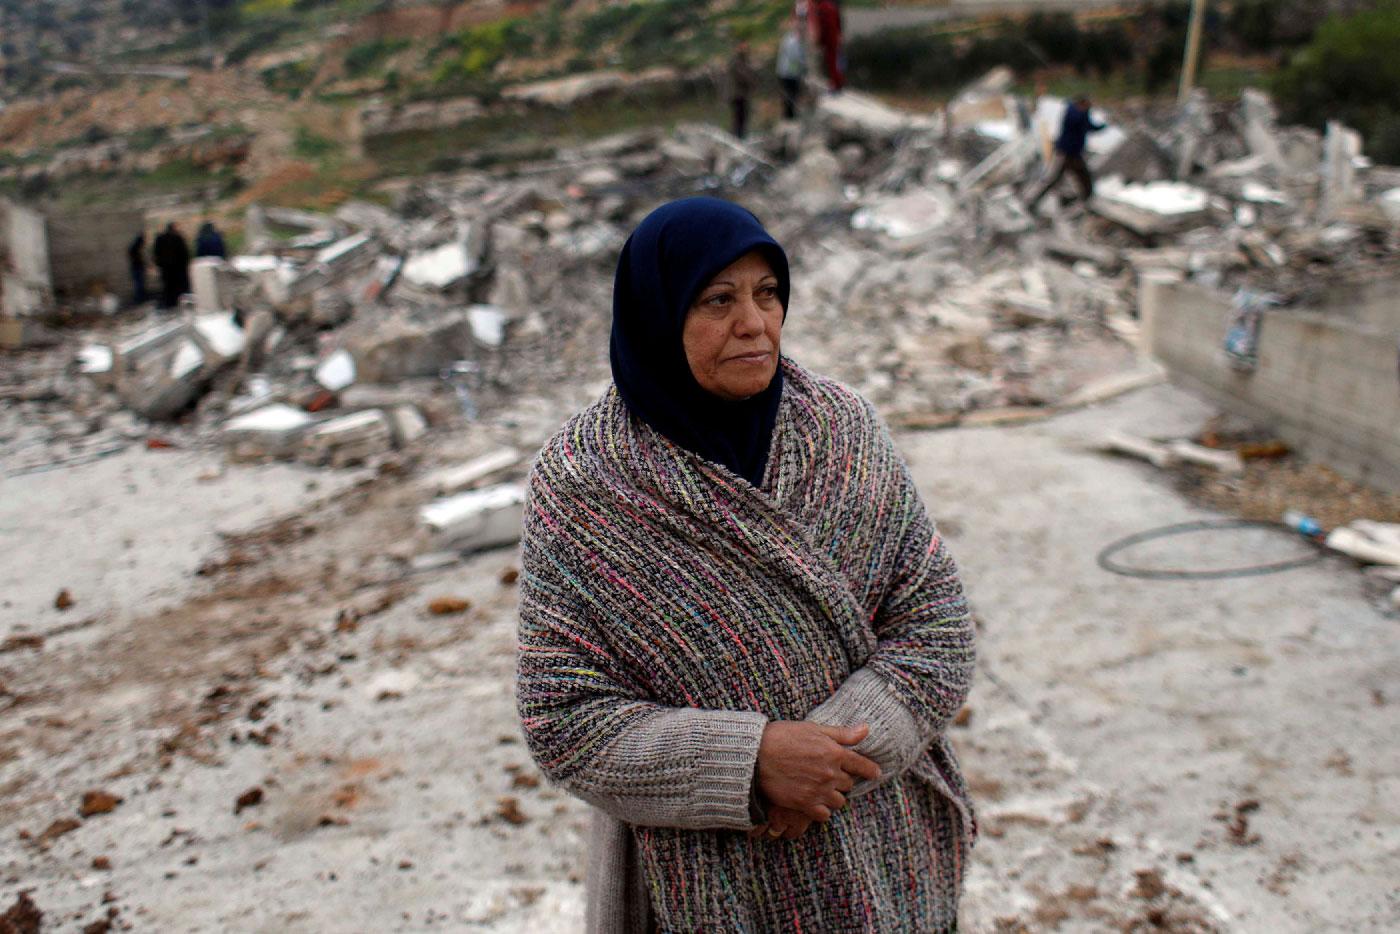 The mother of Palestinian assailant Asem Al-Barghouti looks on as she stands near the remains of his house after it was demolished by Israeli forces, in the village of Kobar near Ramallah, in the Israeli-occupied West Bank, March 7, 2019.